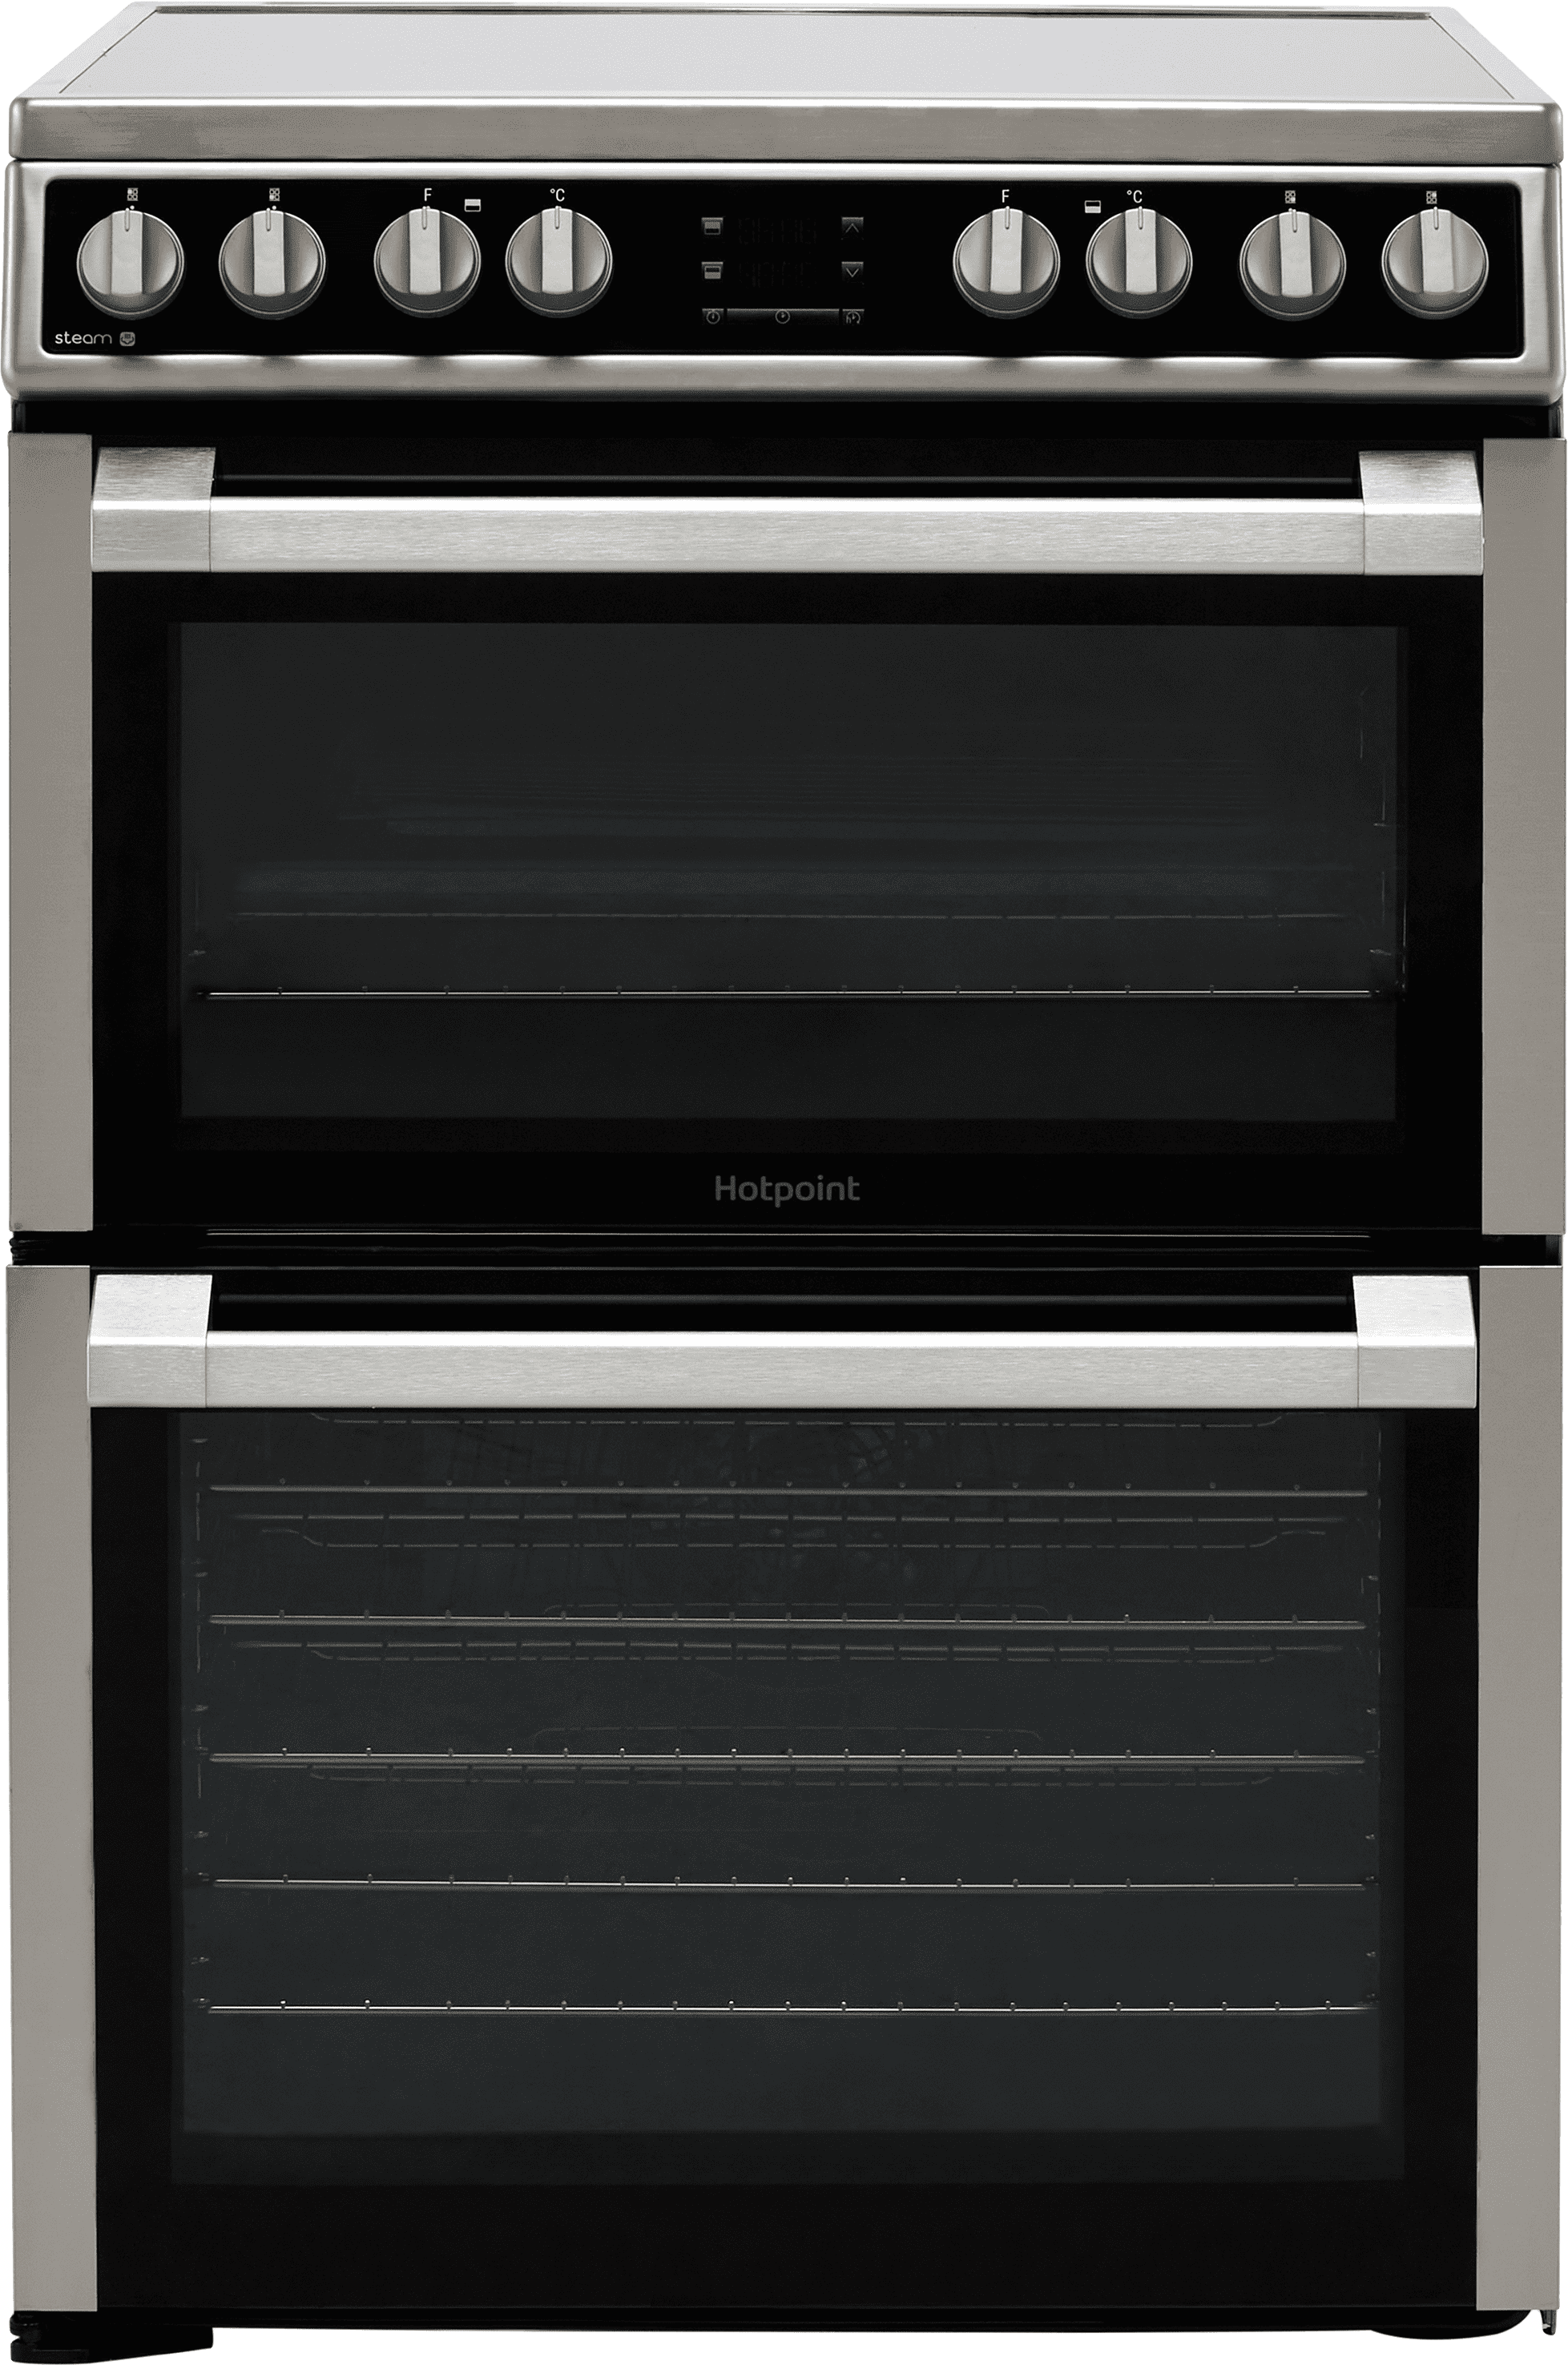 Hotpoint HDM67V8D2CX/UK 60cm Electric Cooker with Ceramic Hob - Silver - A/A Rated, Silver